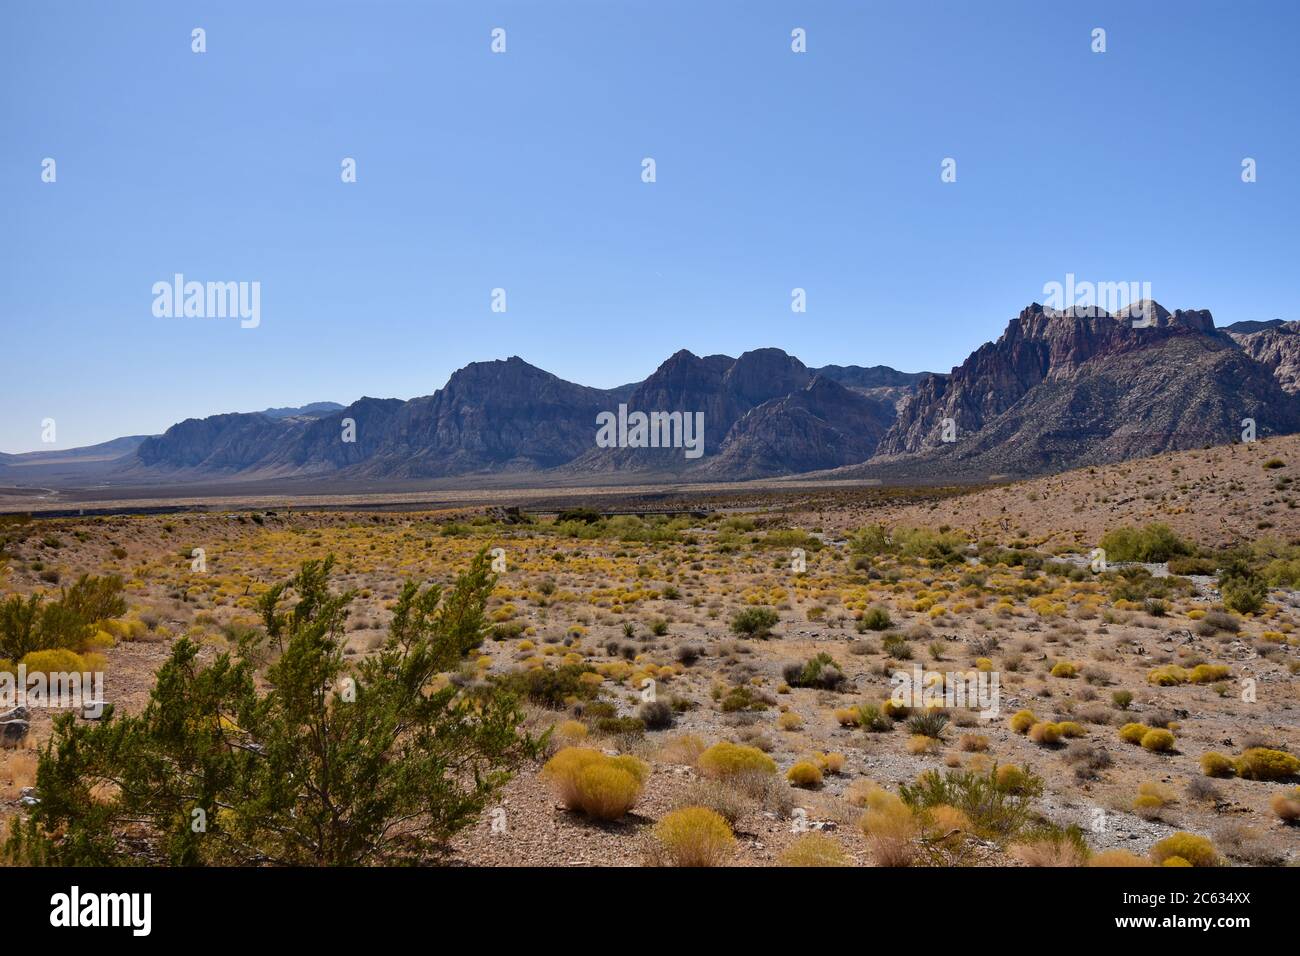 Red Rock Canyon seen from the high point overlook on a clear day with blue sky. Desert foliage in green and yellow and mountains rise in the distance Stock Photo